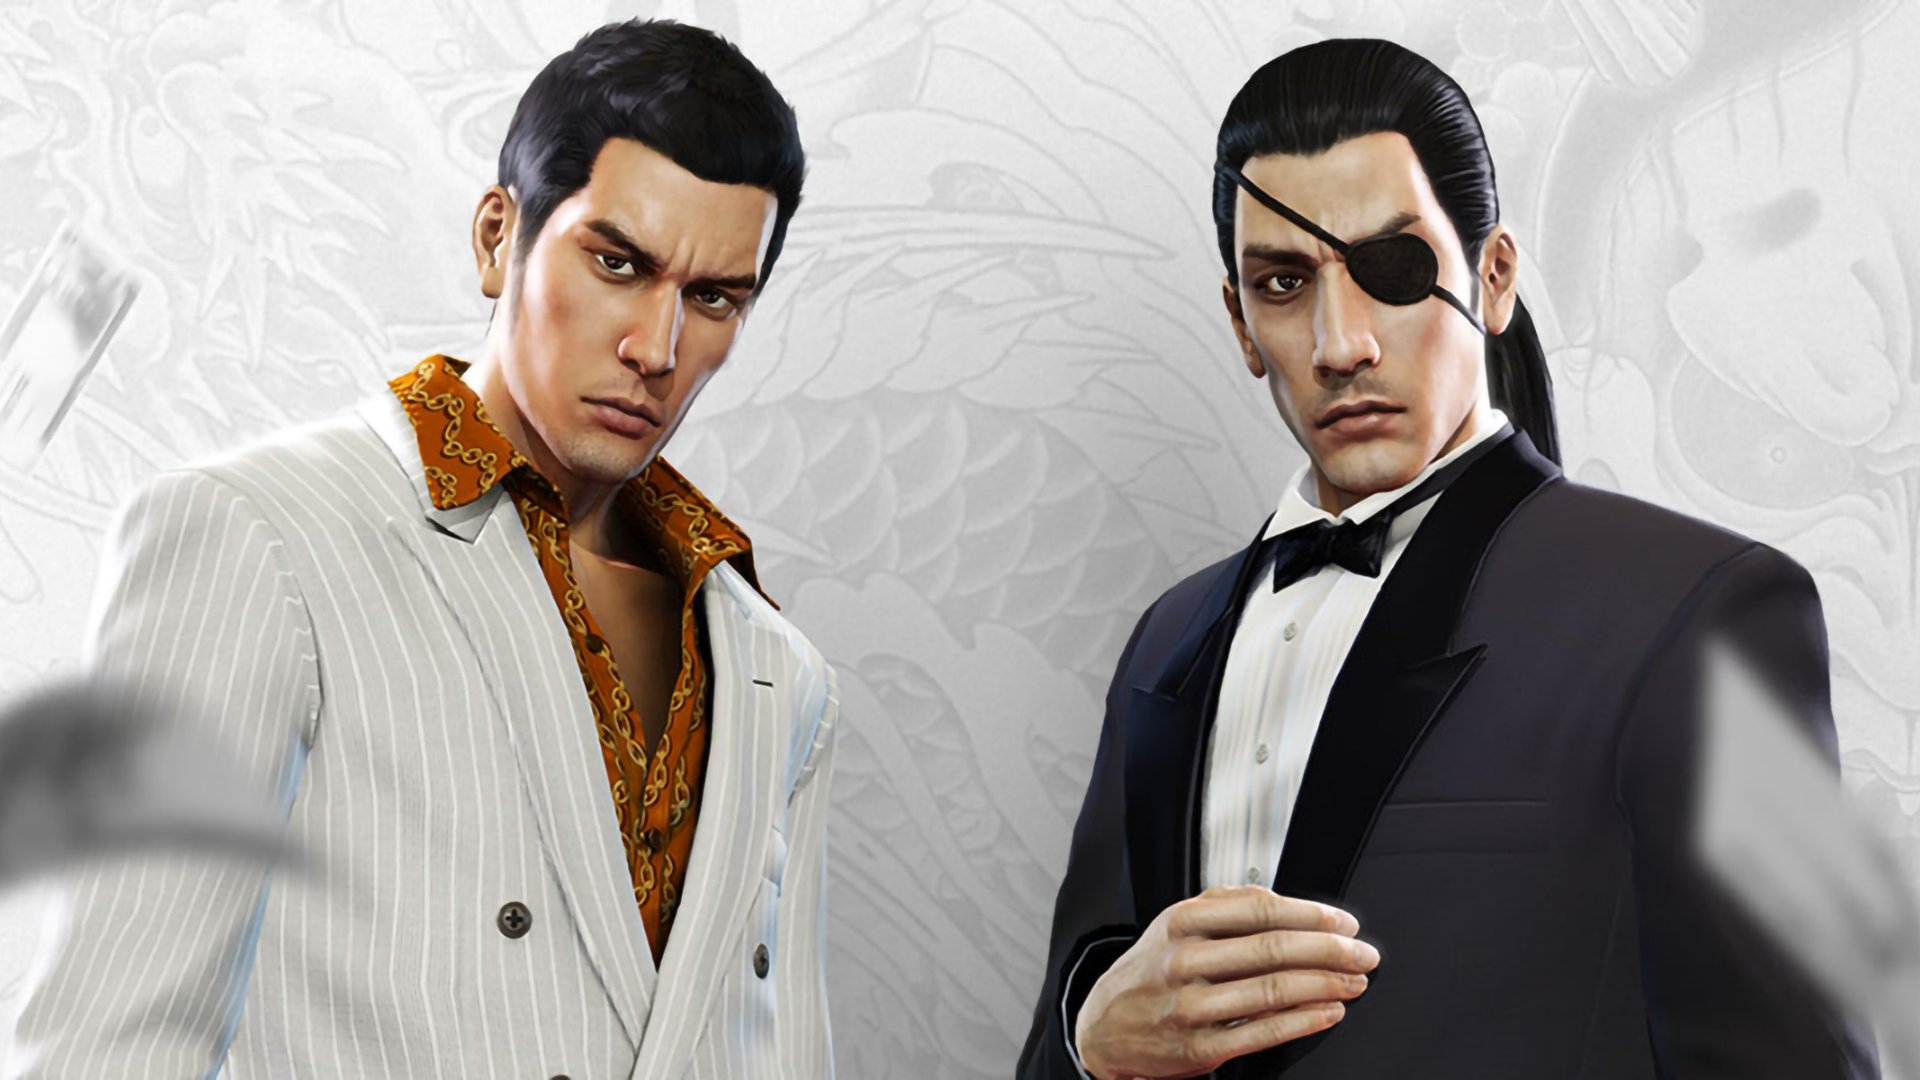 This week in games: Yakuza Kiwami 2 confirmed for PC next month, H1Z1's new  developers call it quits